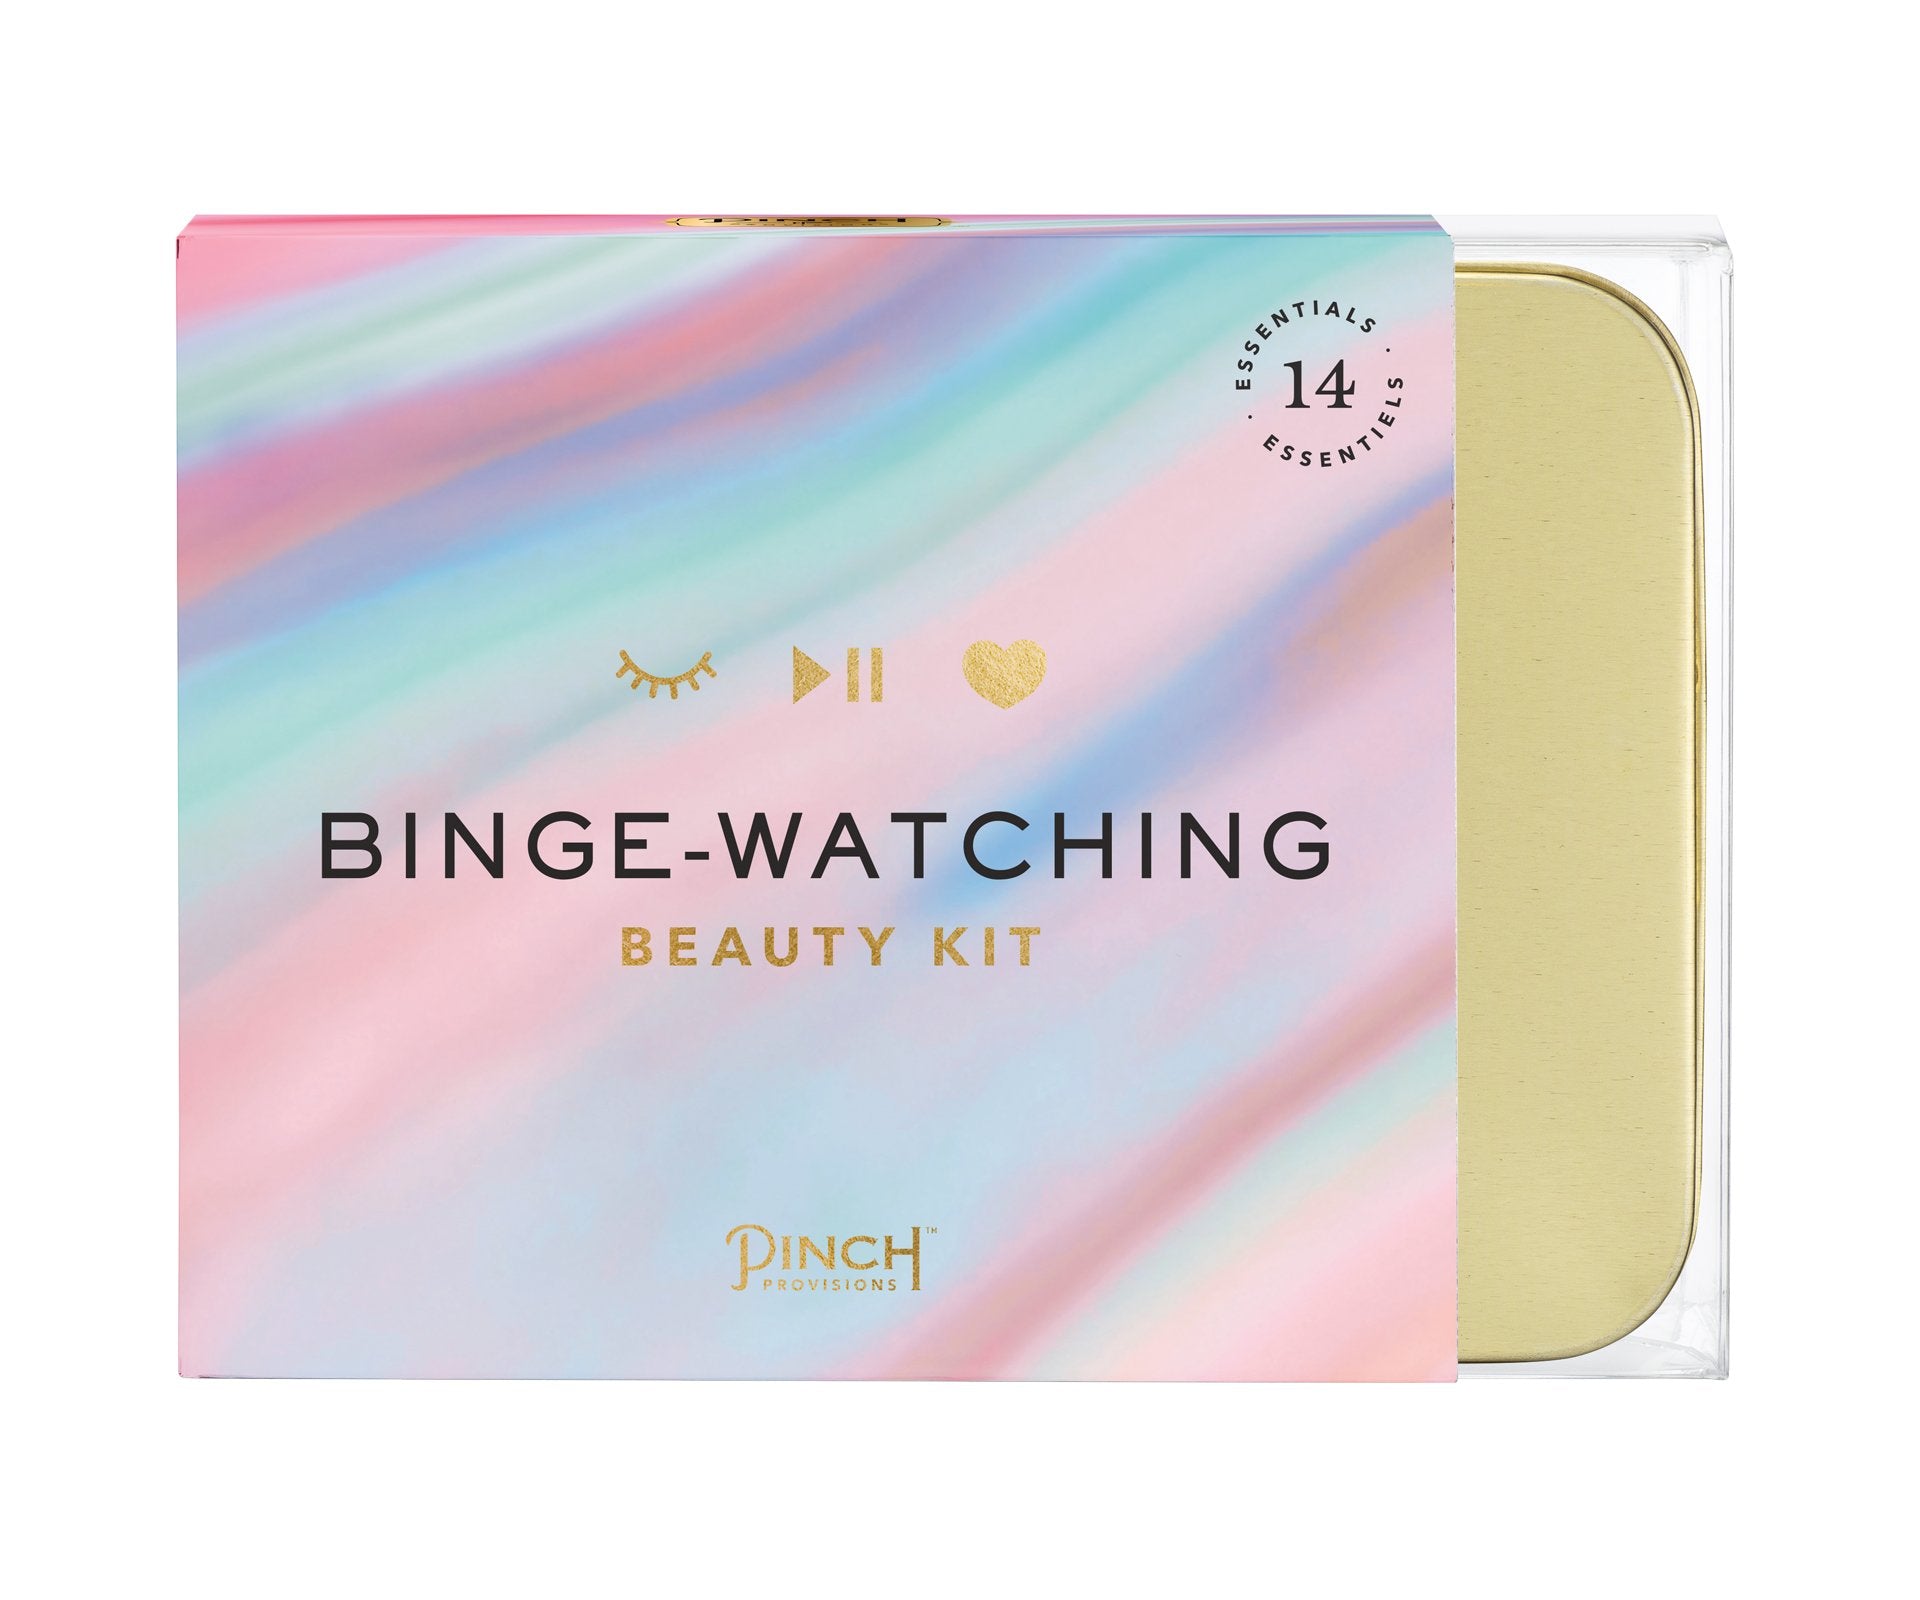 Pinch Provisions Binge Watching Beauty Kit - Gifted